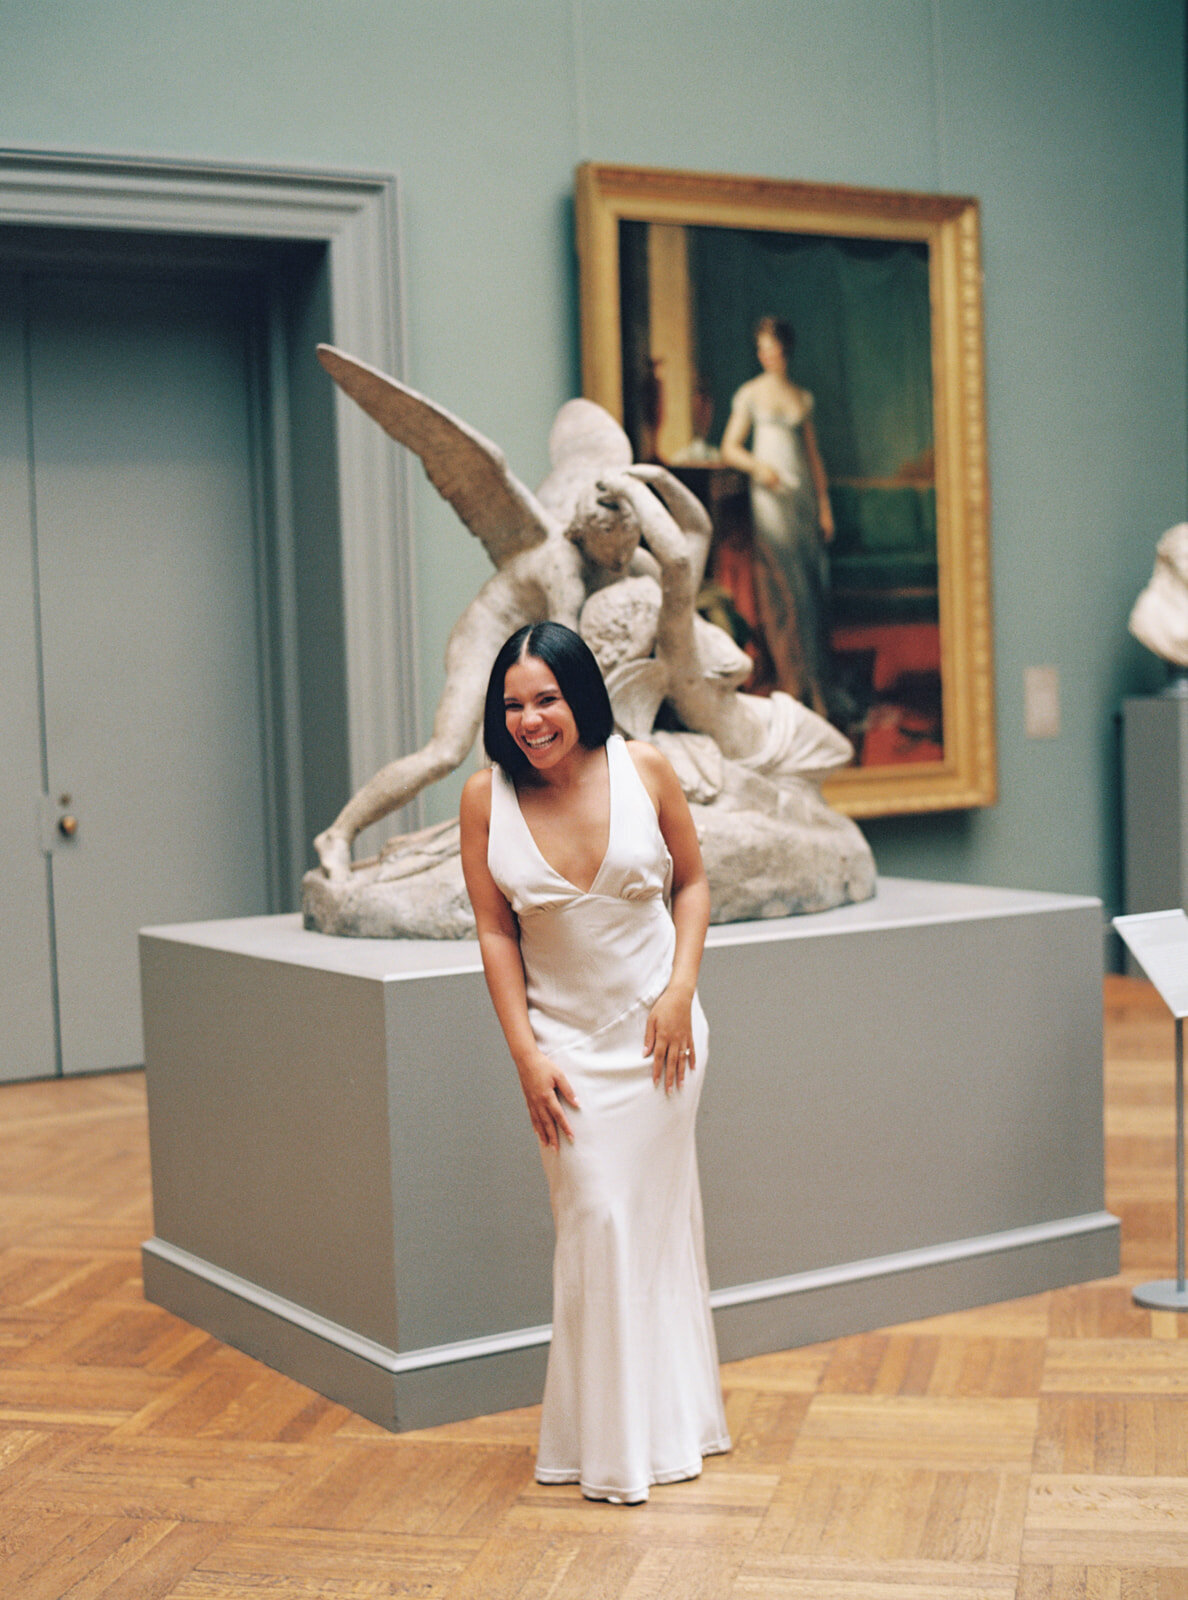 bride laughing with a statue and art behind her